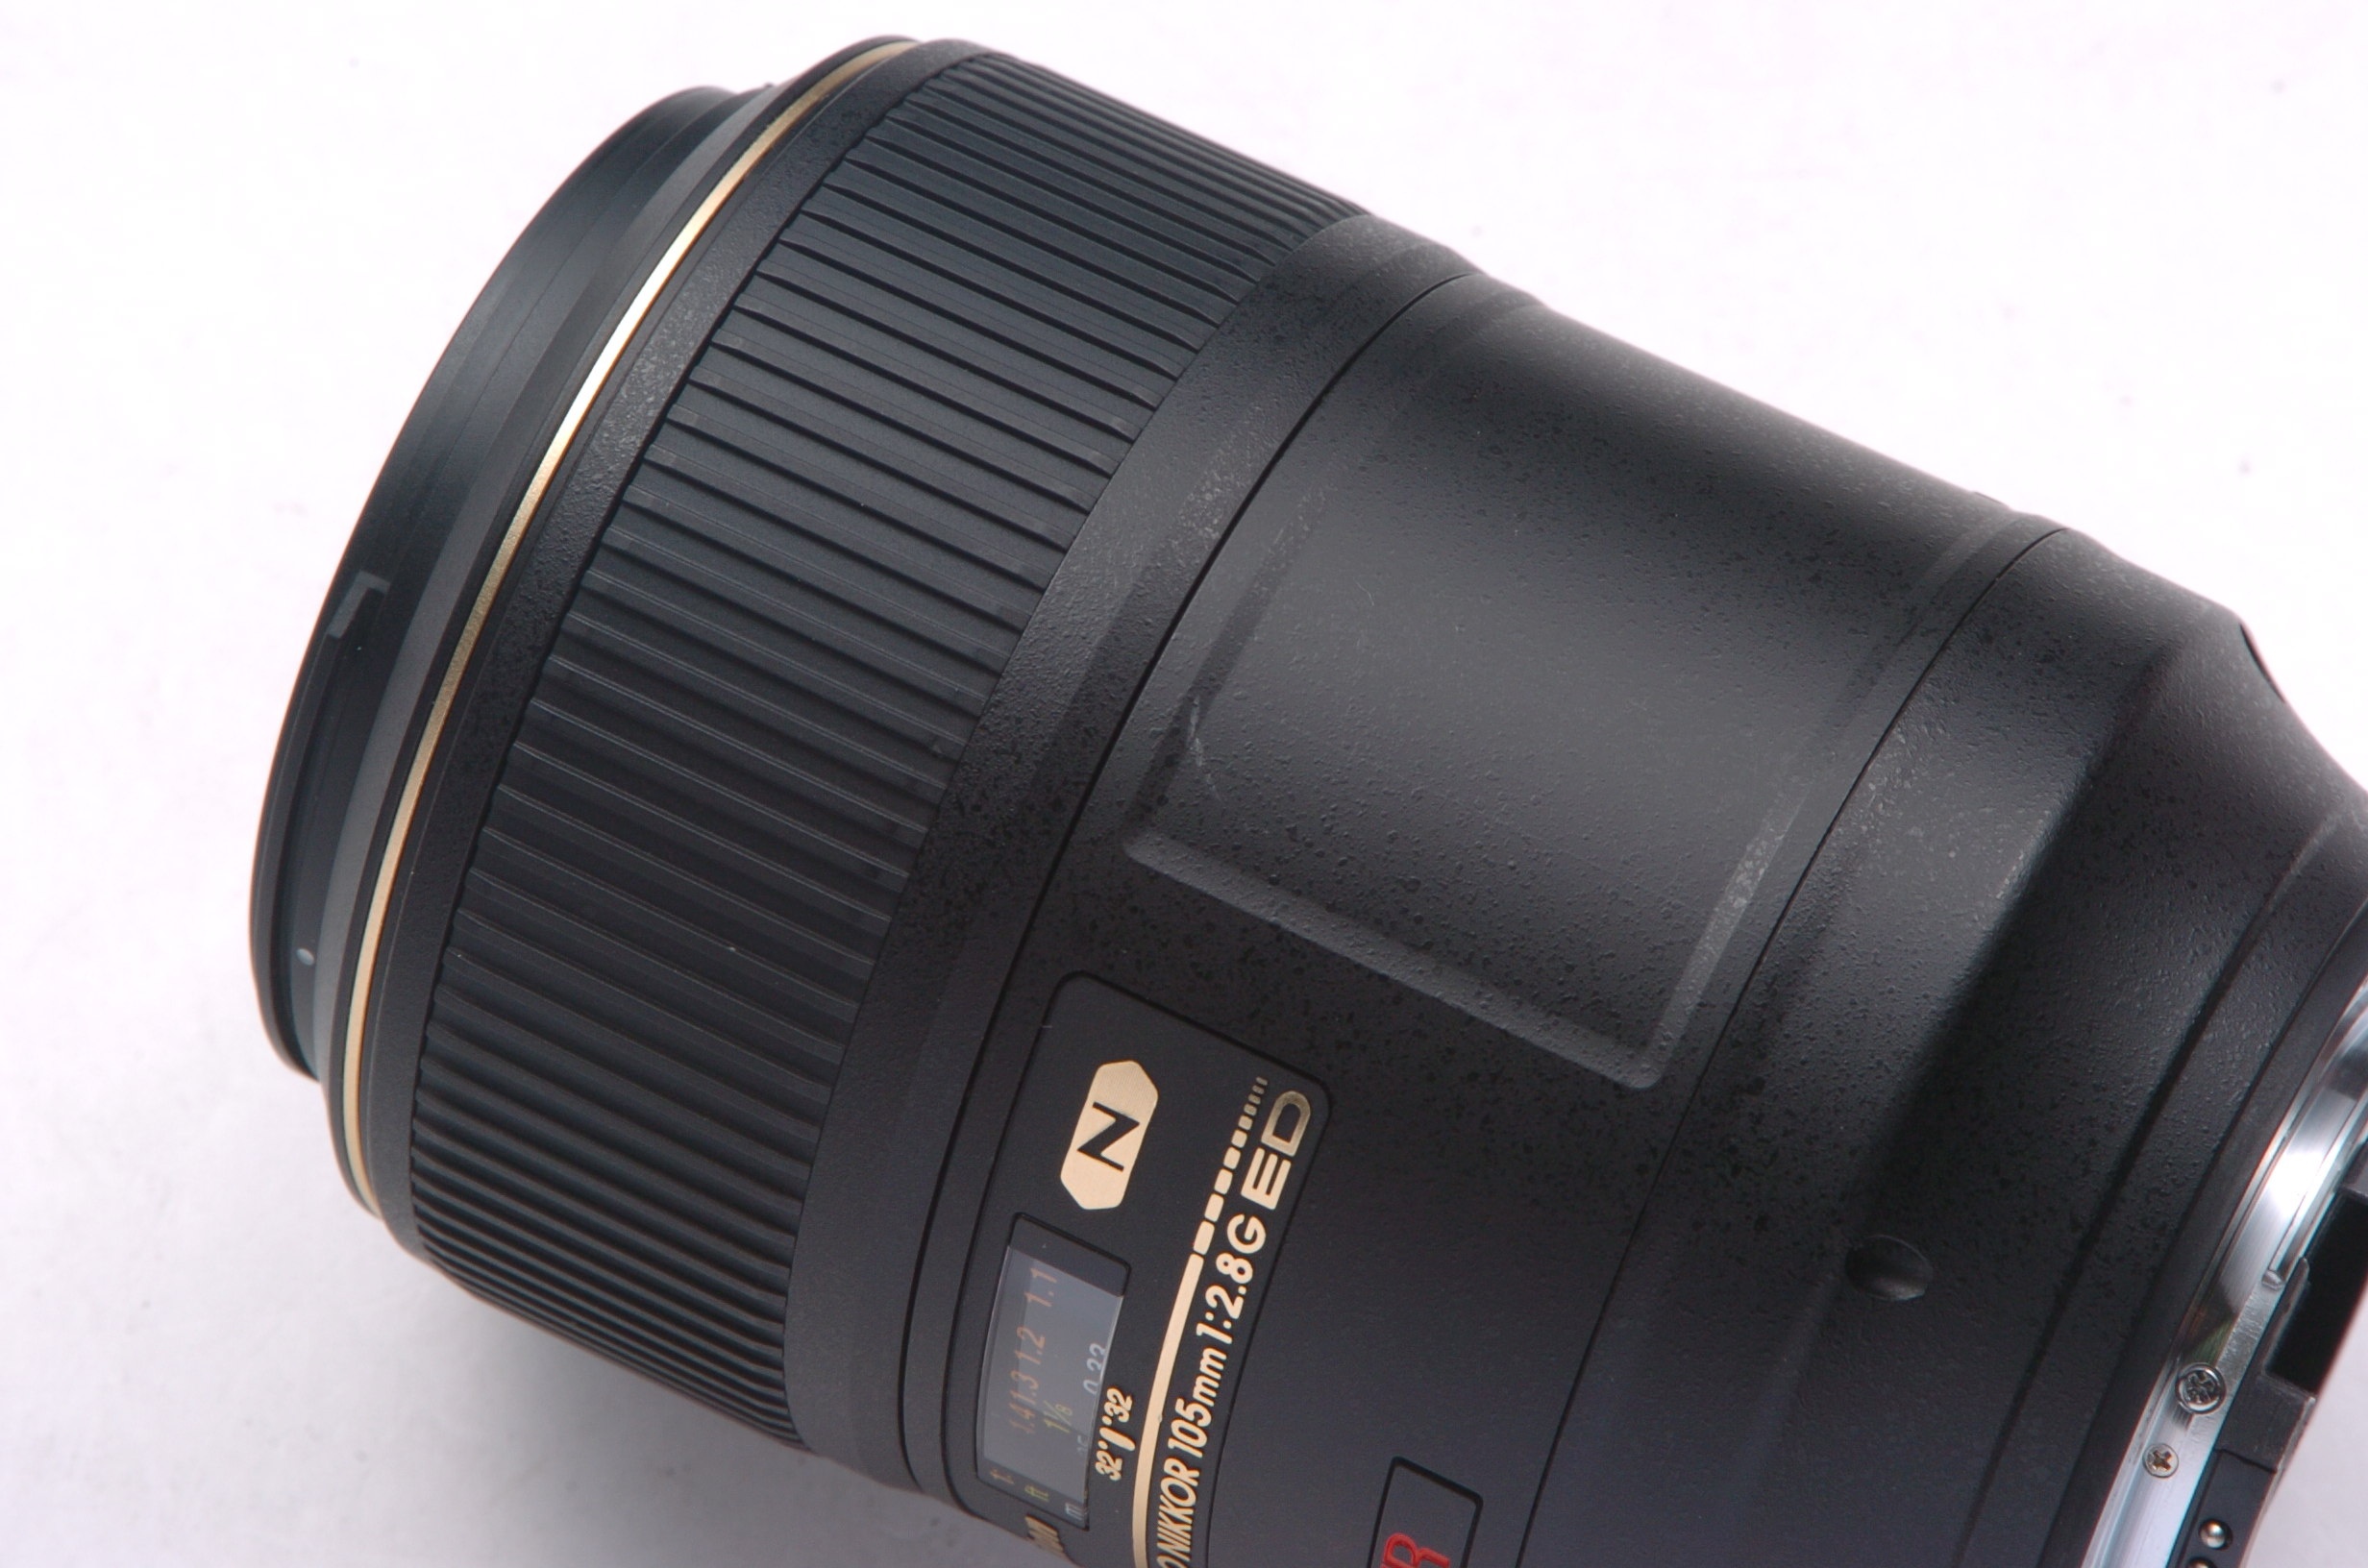 AF-S VR Micro ED 105mm F2.8G (IF)